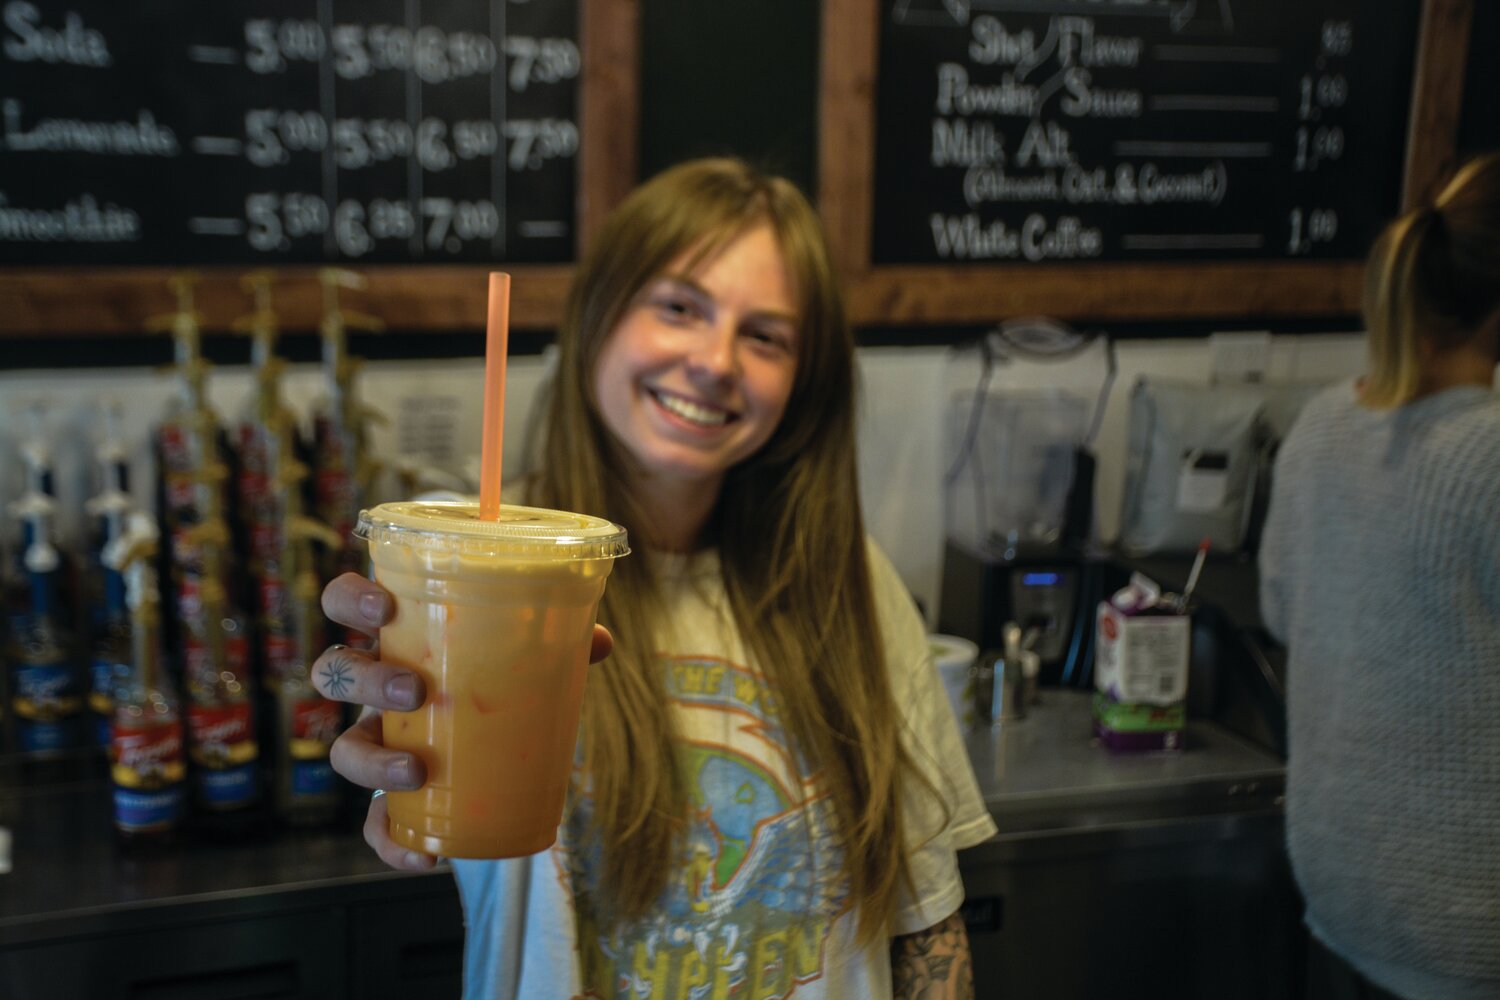 Presly Littlejohn, an employee at Worthy Coffee Co., holds out a drink at the business on June 26.